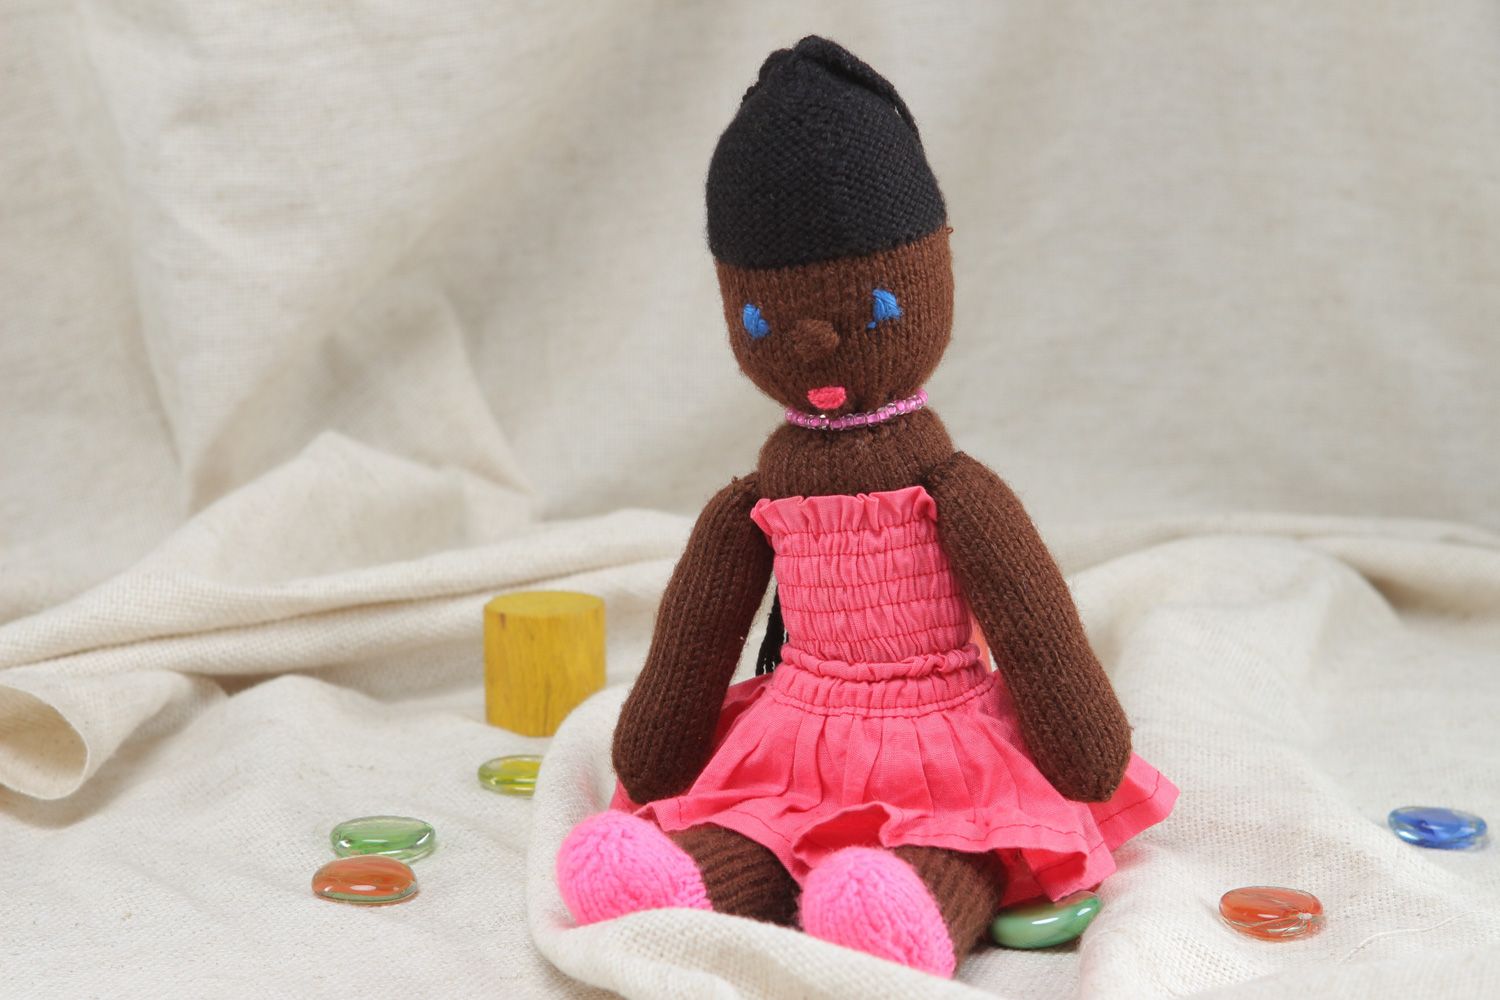 Handmade soft toy knitted of acrylic threads Mulatto in pink dress for little girl photo 5